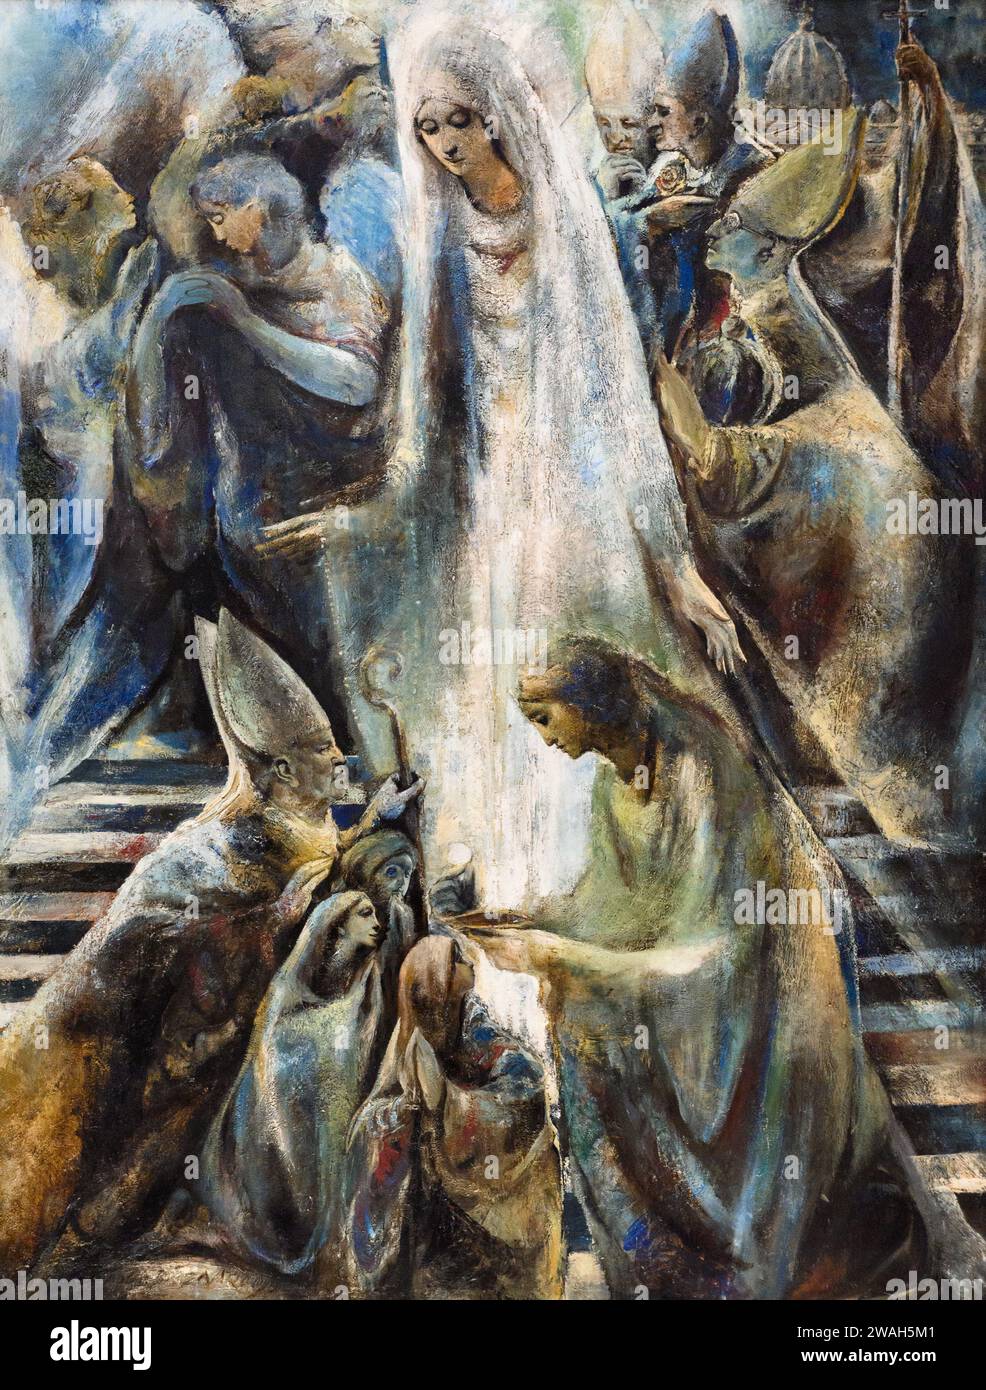 The painting above the main altar in the Basilica of Our Lady of the Rosary in Fatima, Portugal. The painting relates the history of the Fatima events. Stock Photo